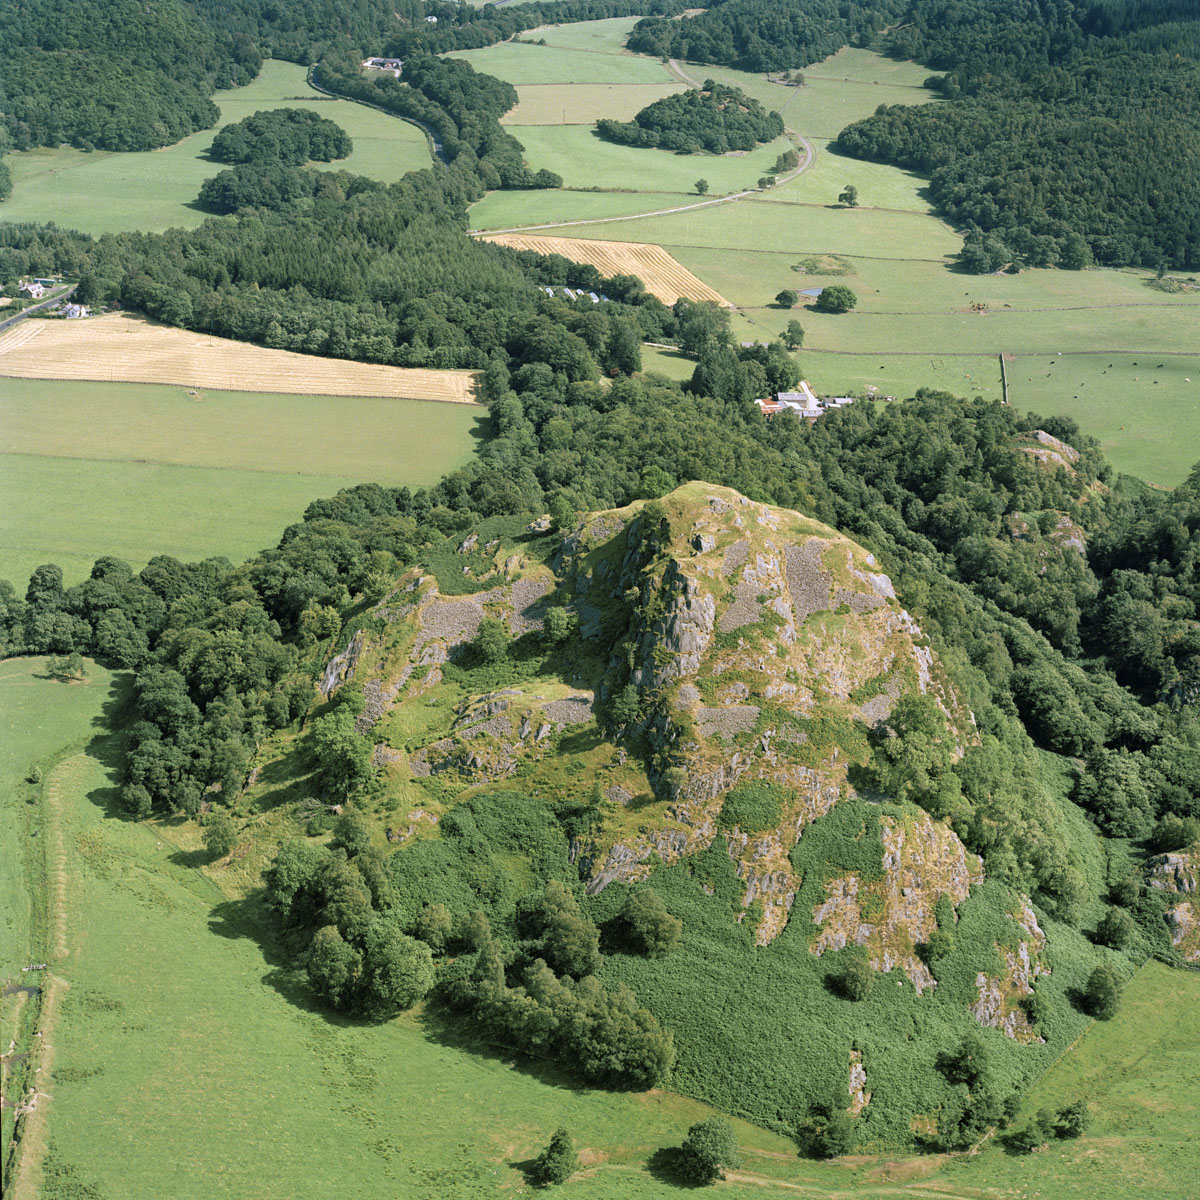 Early Medieval Fortified Site